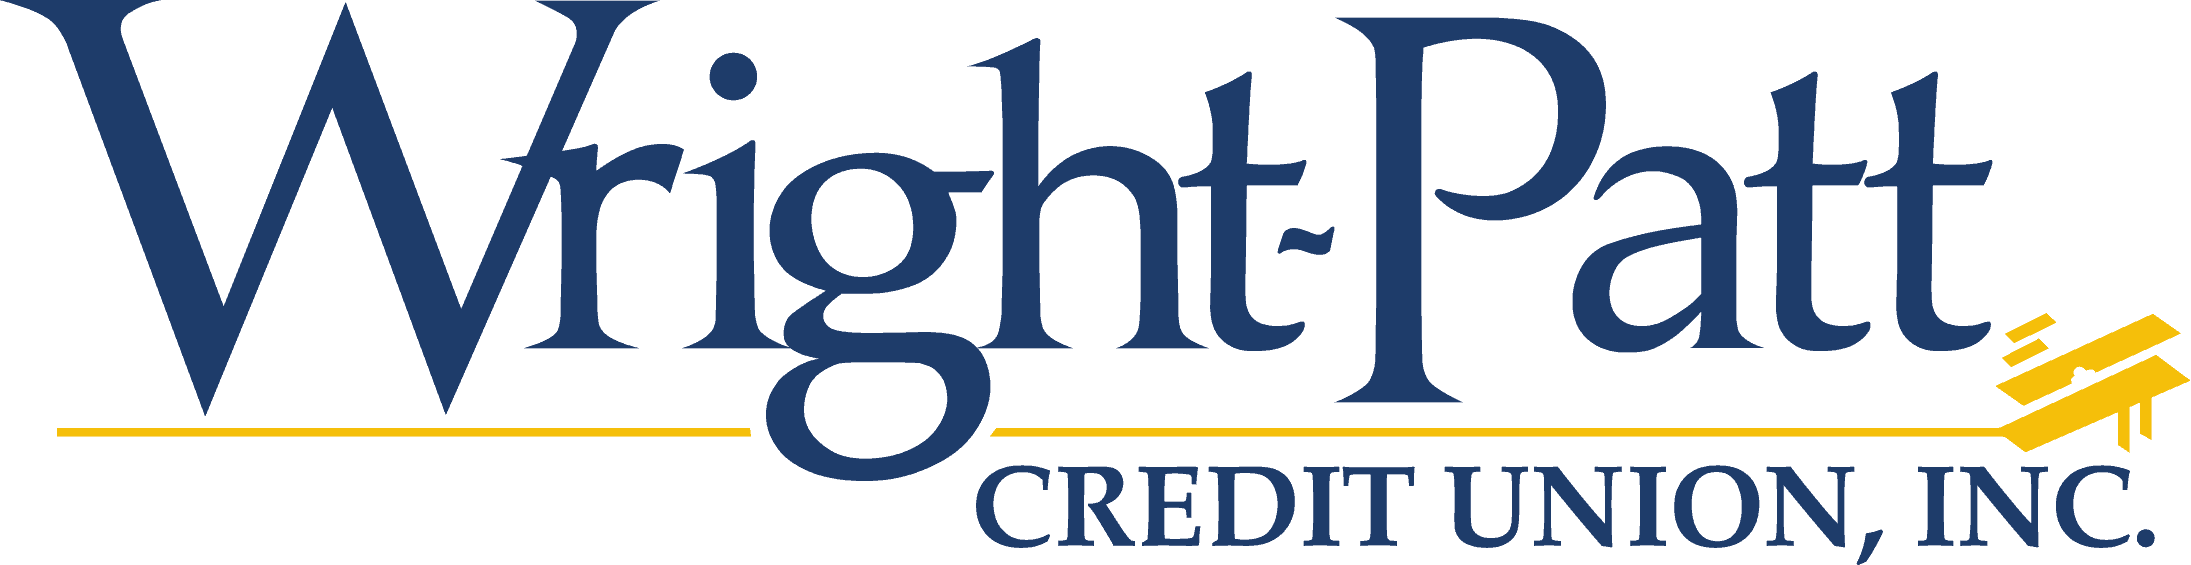 A review of the Wright-Patt Credit Union